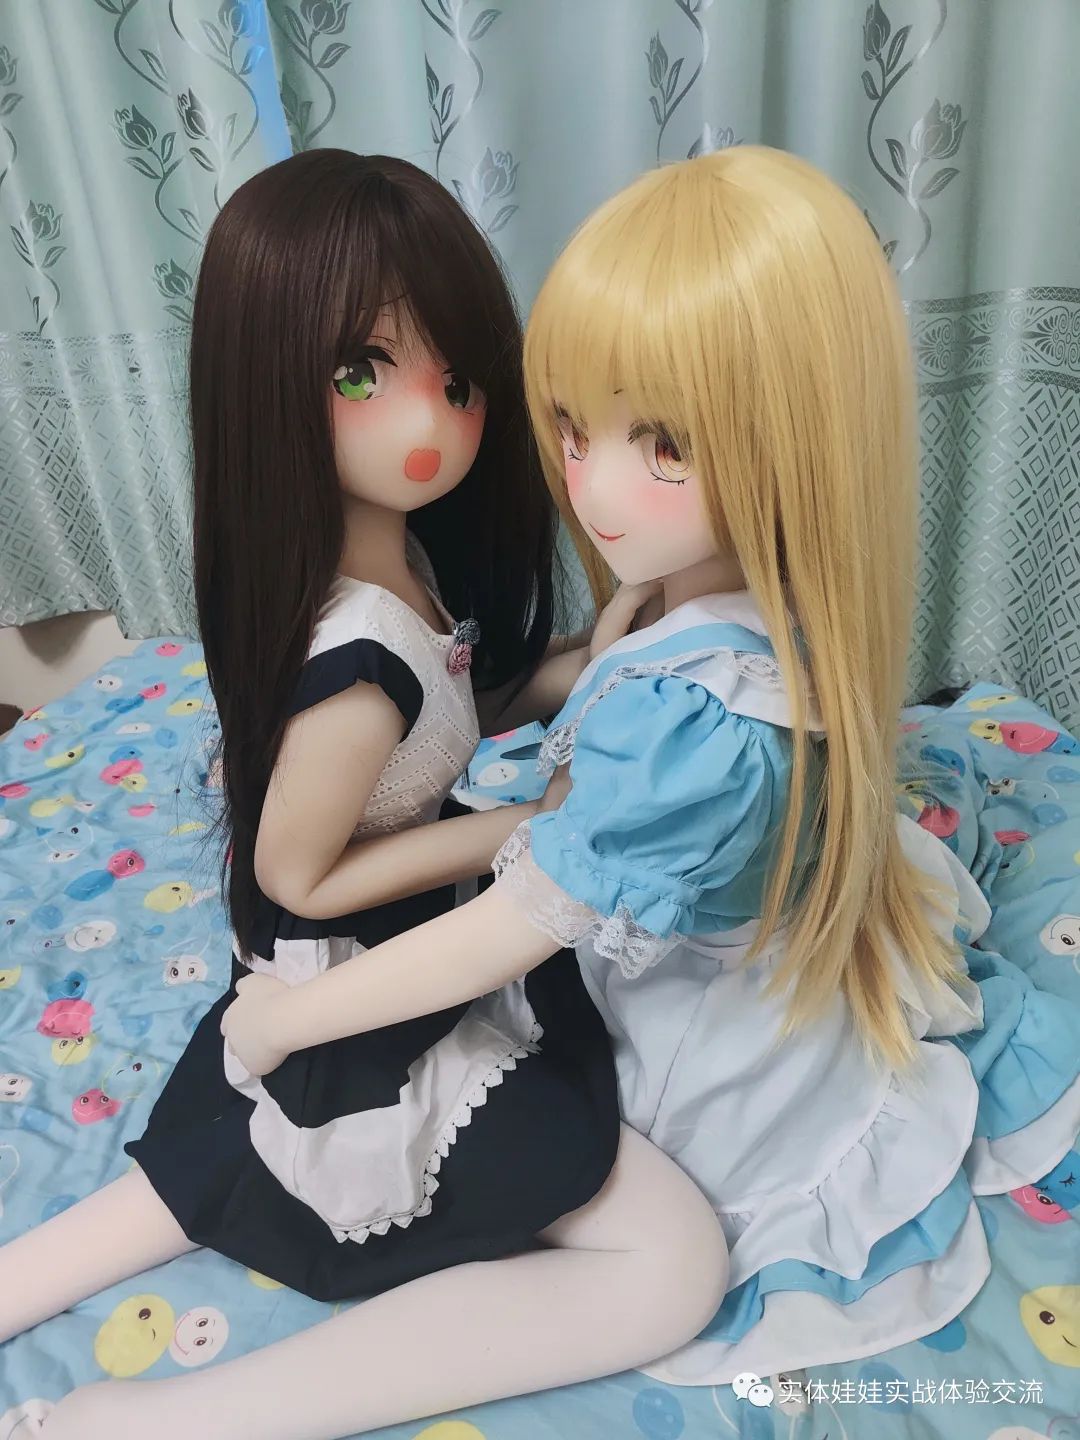 How many times can silicone dolls be used?